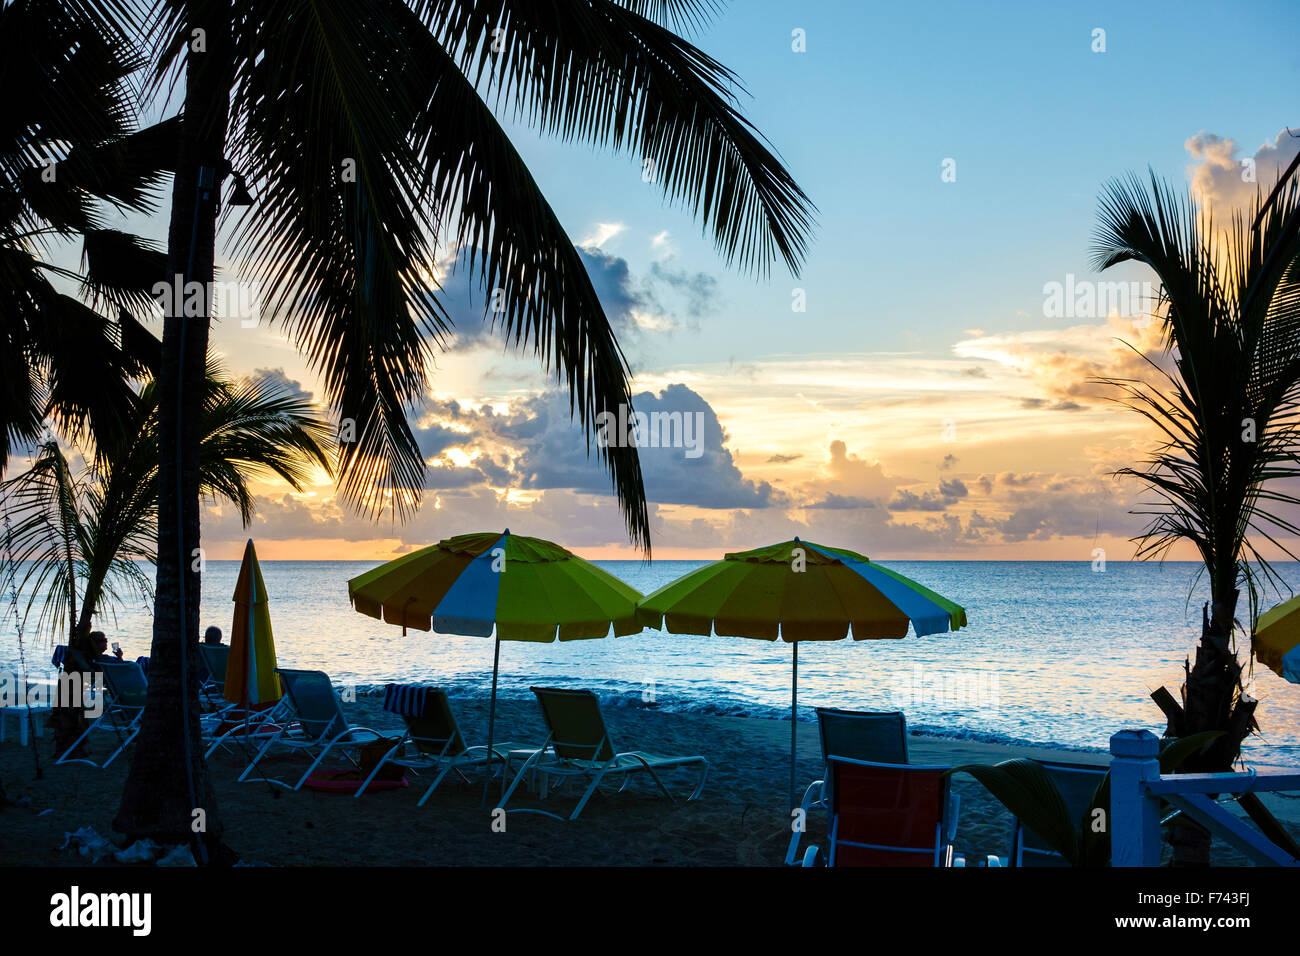 The beach at a resort at sunset, palm trees, chairs and beach umbrellas. St. Croix, U.S. Virgin Islands. USVI, U.S.V.I. Cottages by the Sea resort. Stock Photo